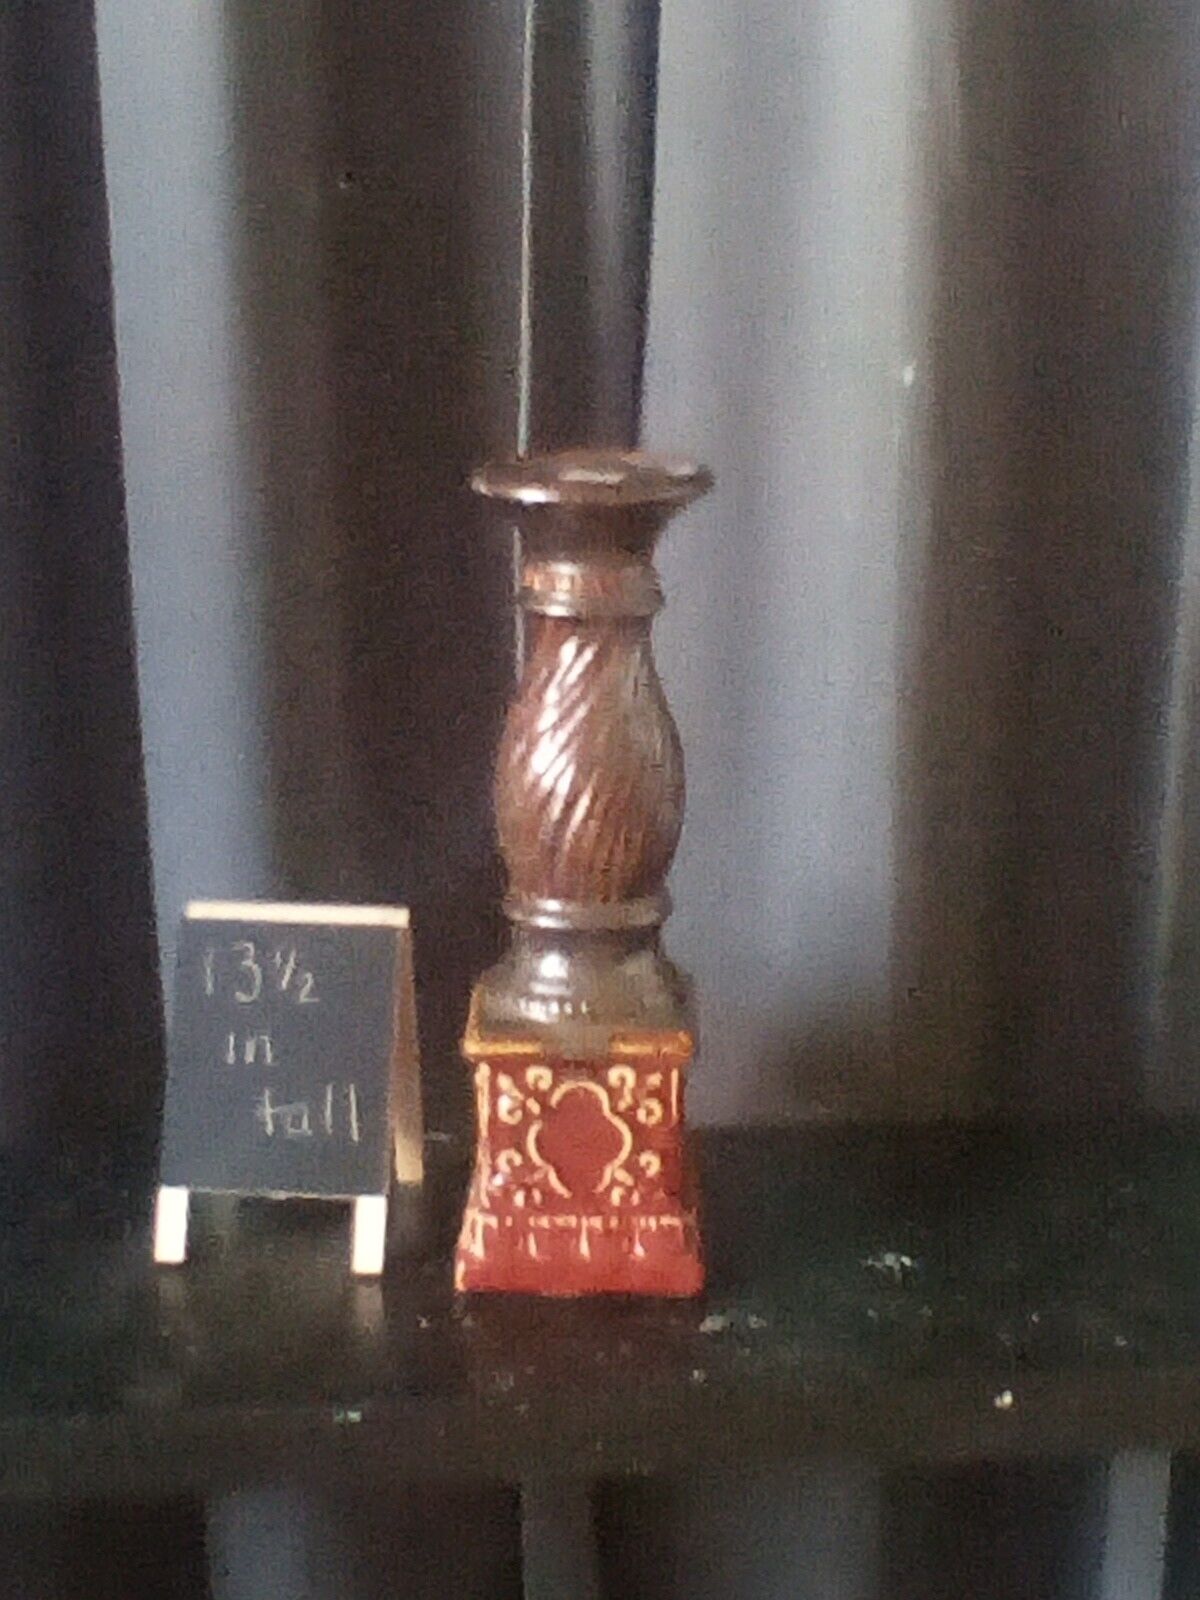 Decorative candle holder 13 1/2 inches tall